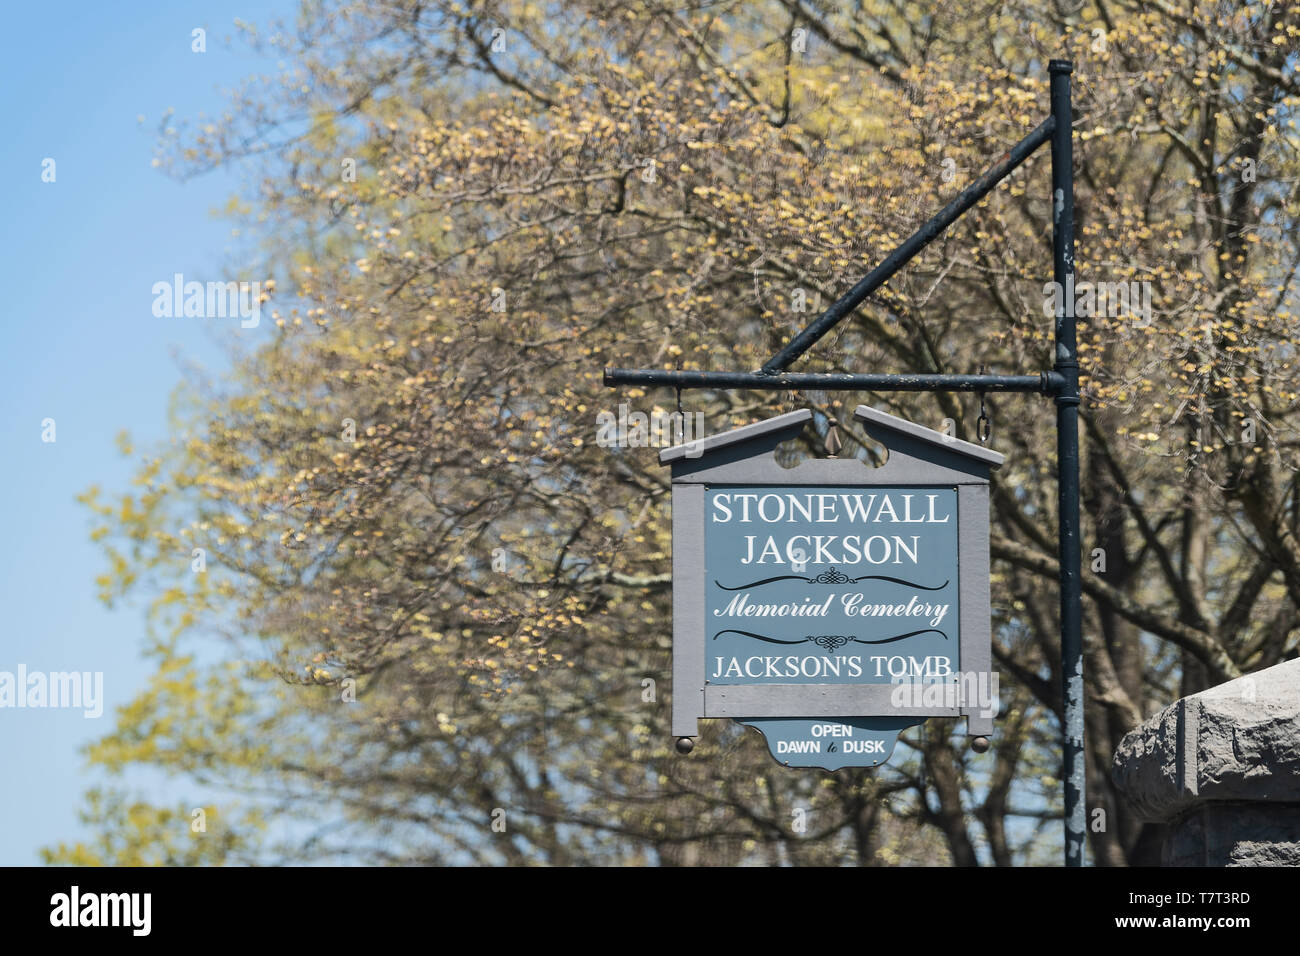 Lexington, USA - April 18, 2018: Stonewall Jackson Memorial Cemetery sign for gravesite and tomb of confederate general in Virginia Stock Photo